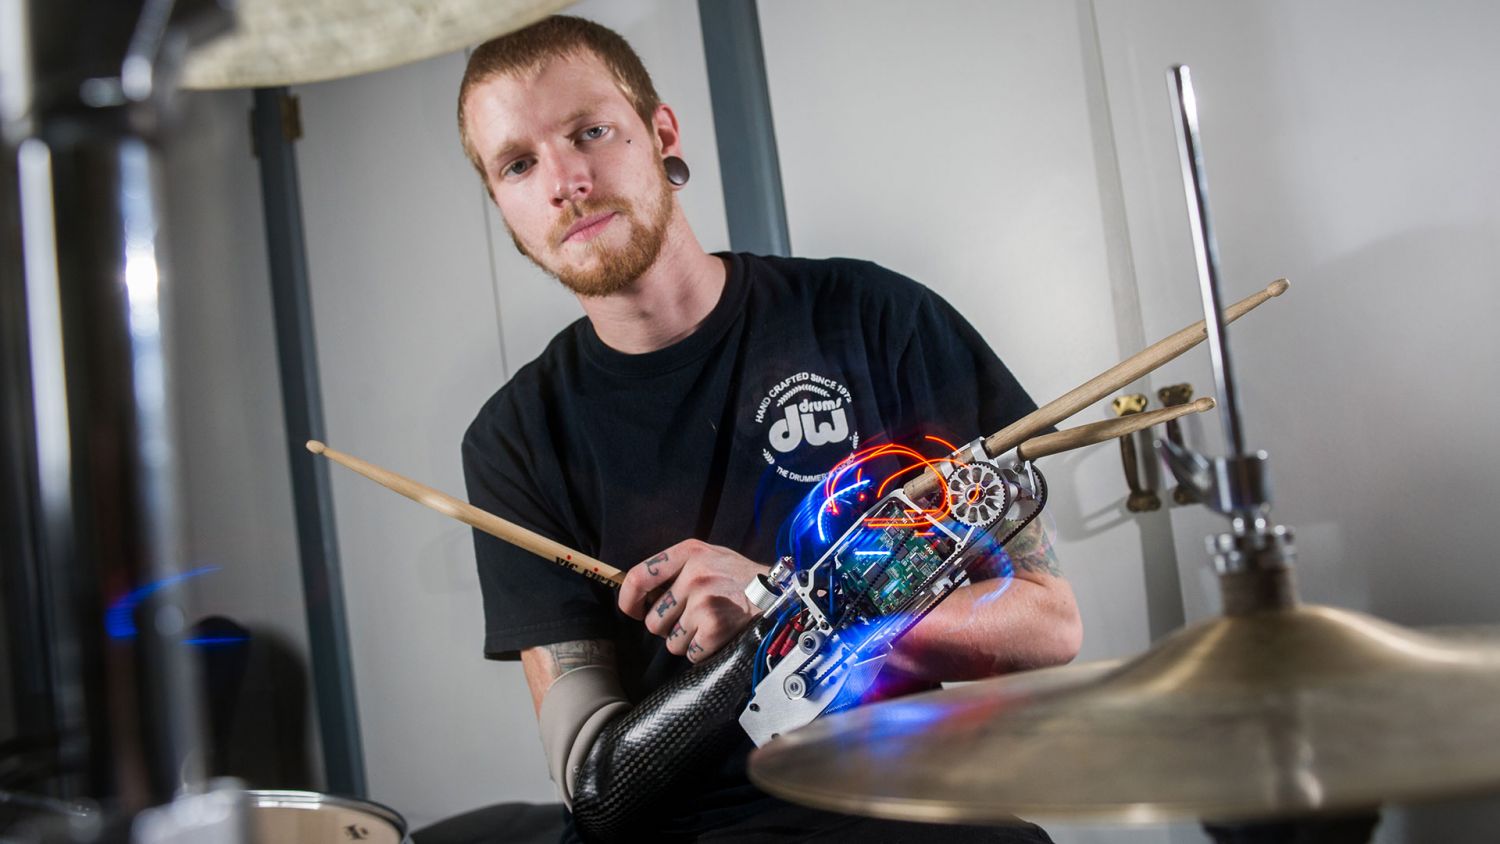 drummer with robotic arm